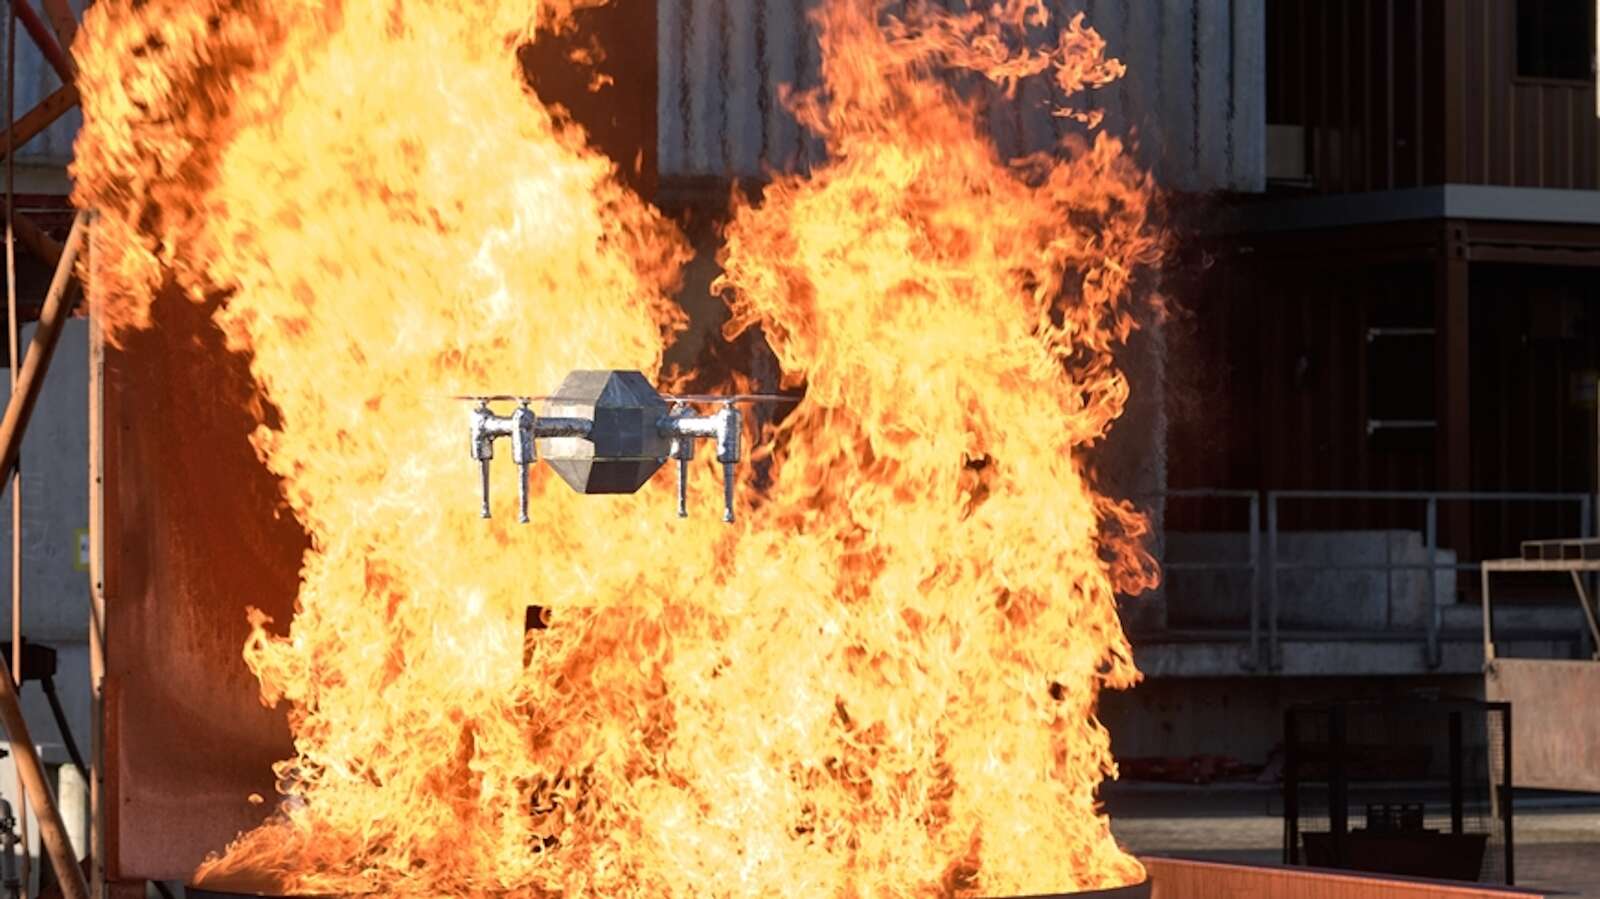 This drone can withstand a temperature of 200 degrees Celsius!